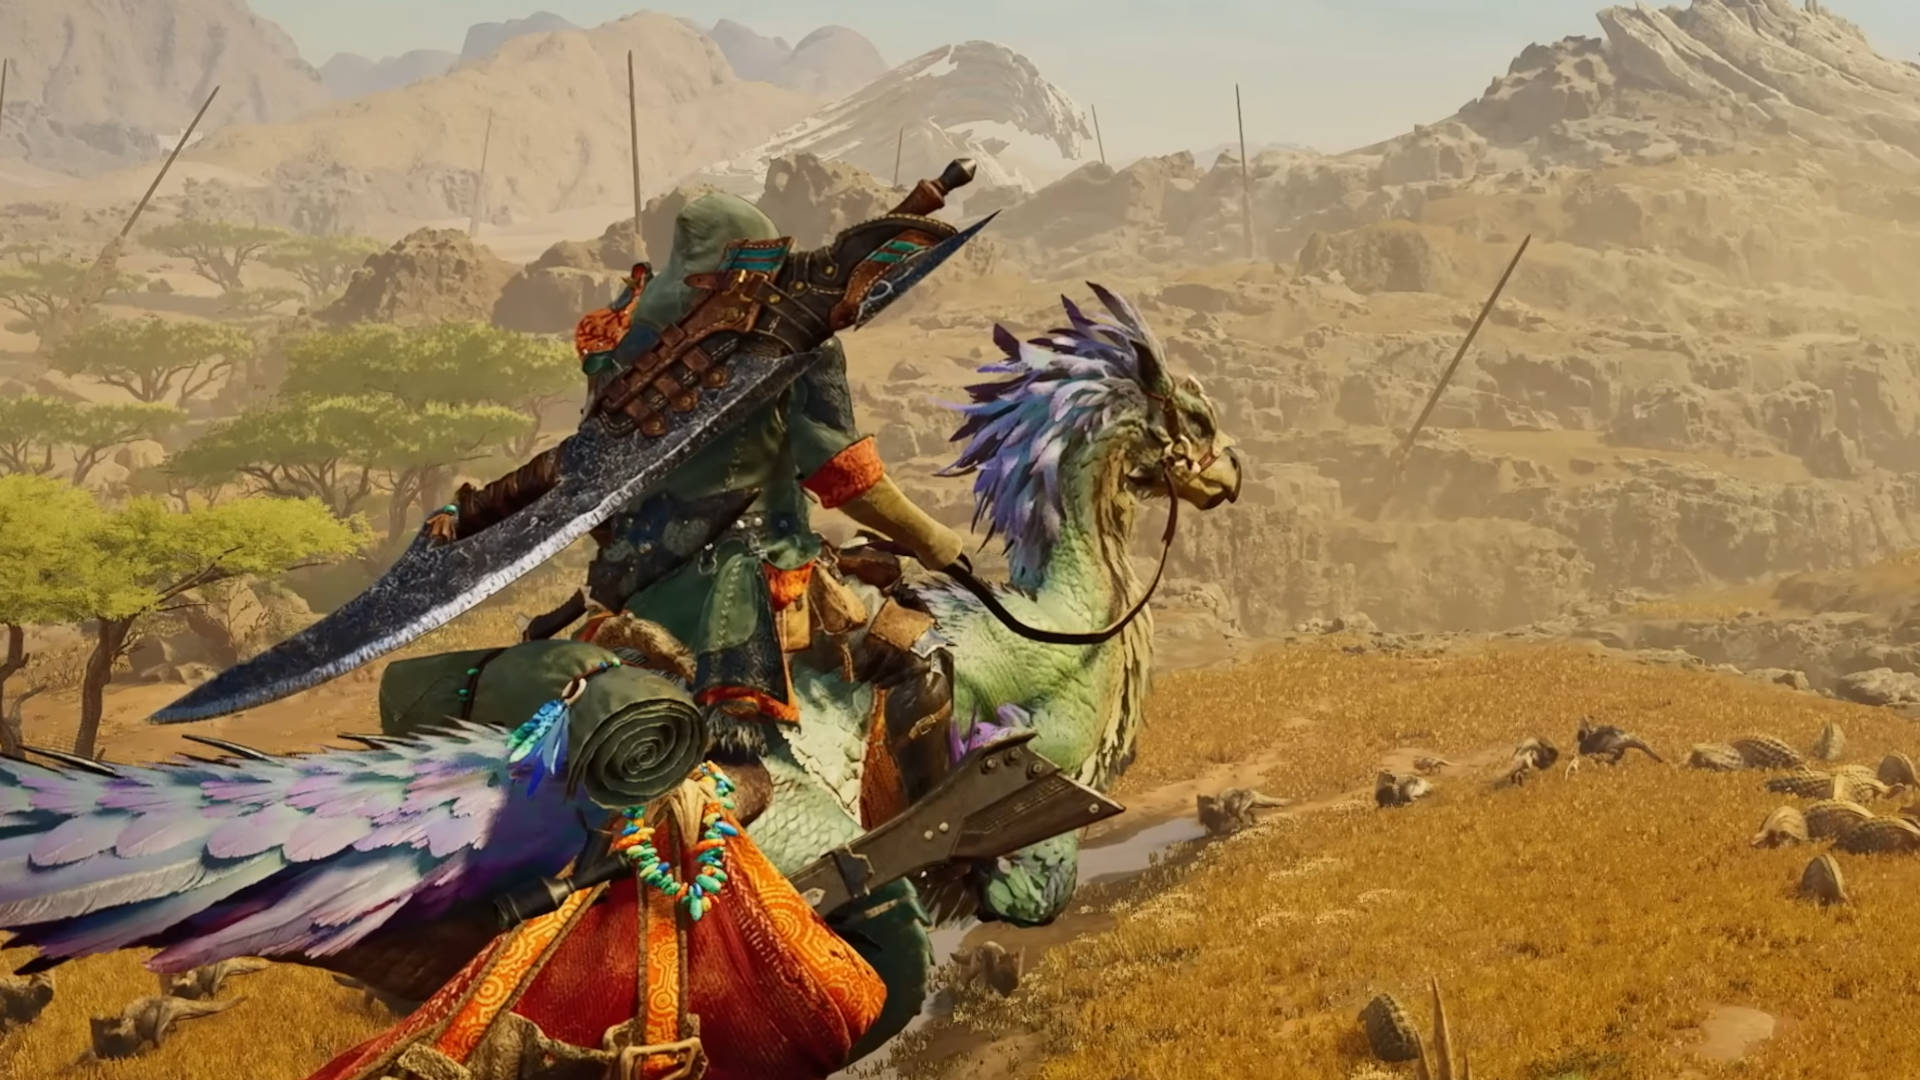 Monster Hunter Wilds release date estimate, trailers, and latest news